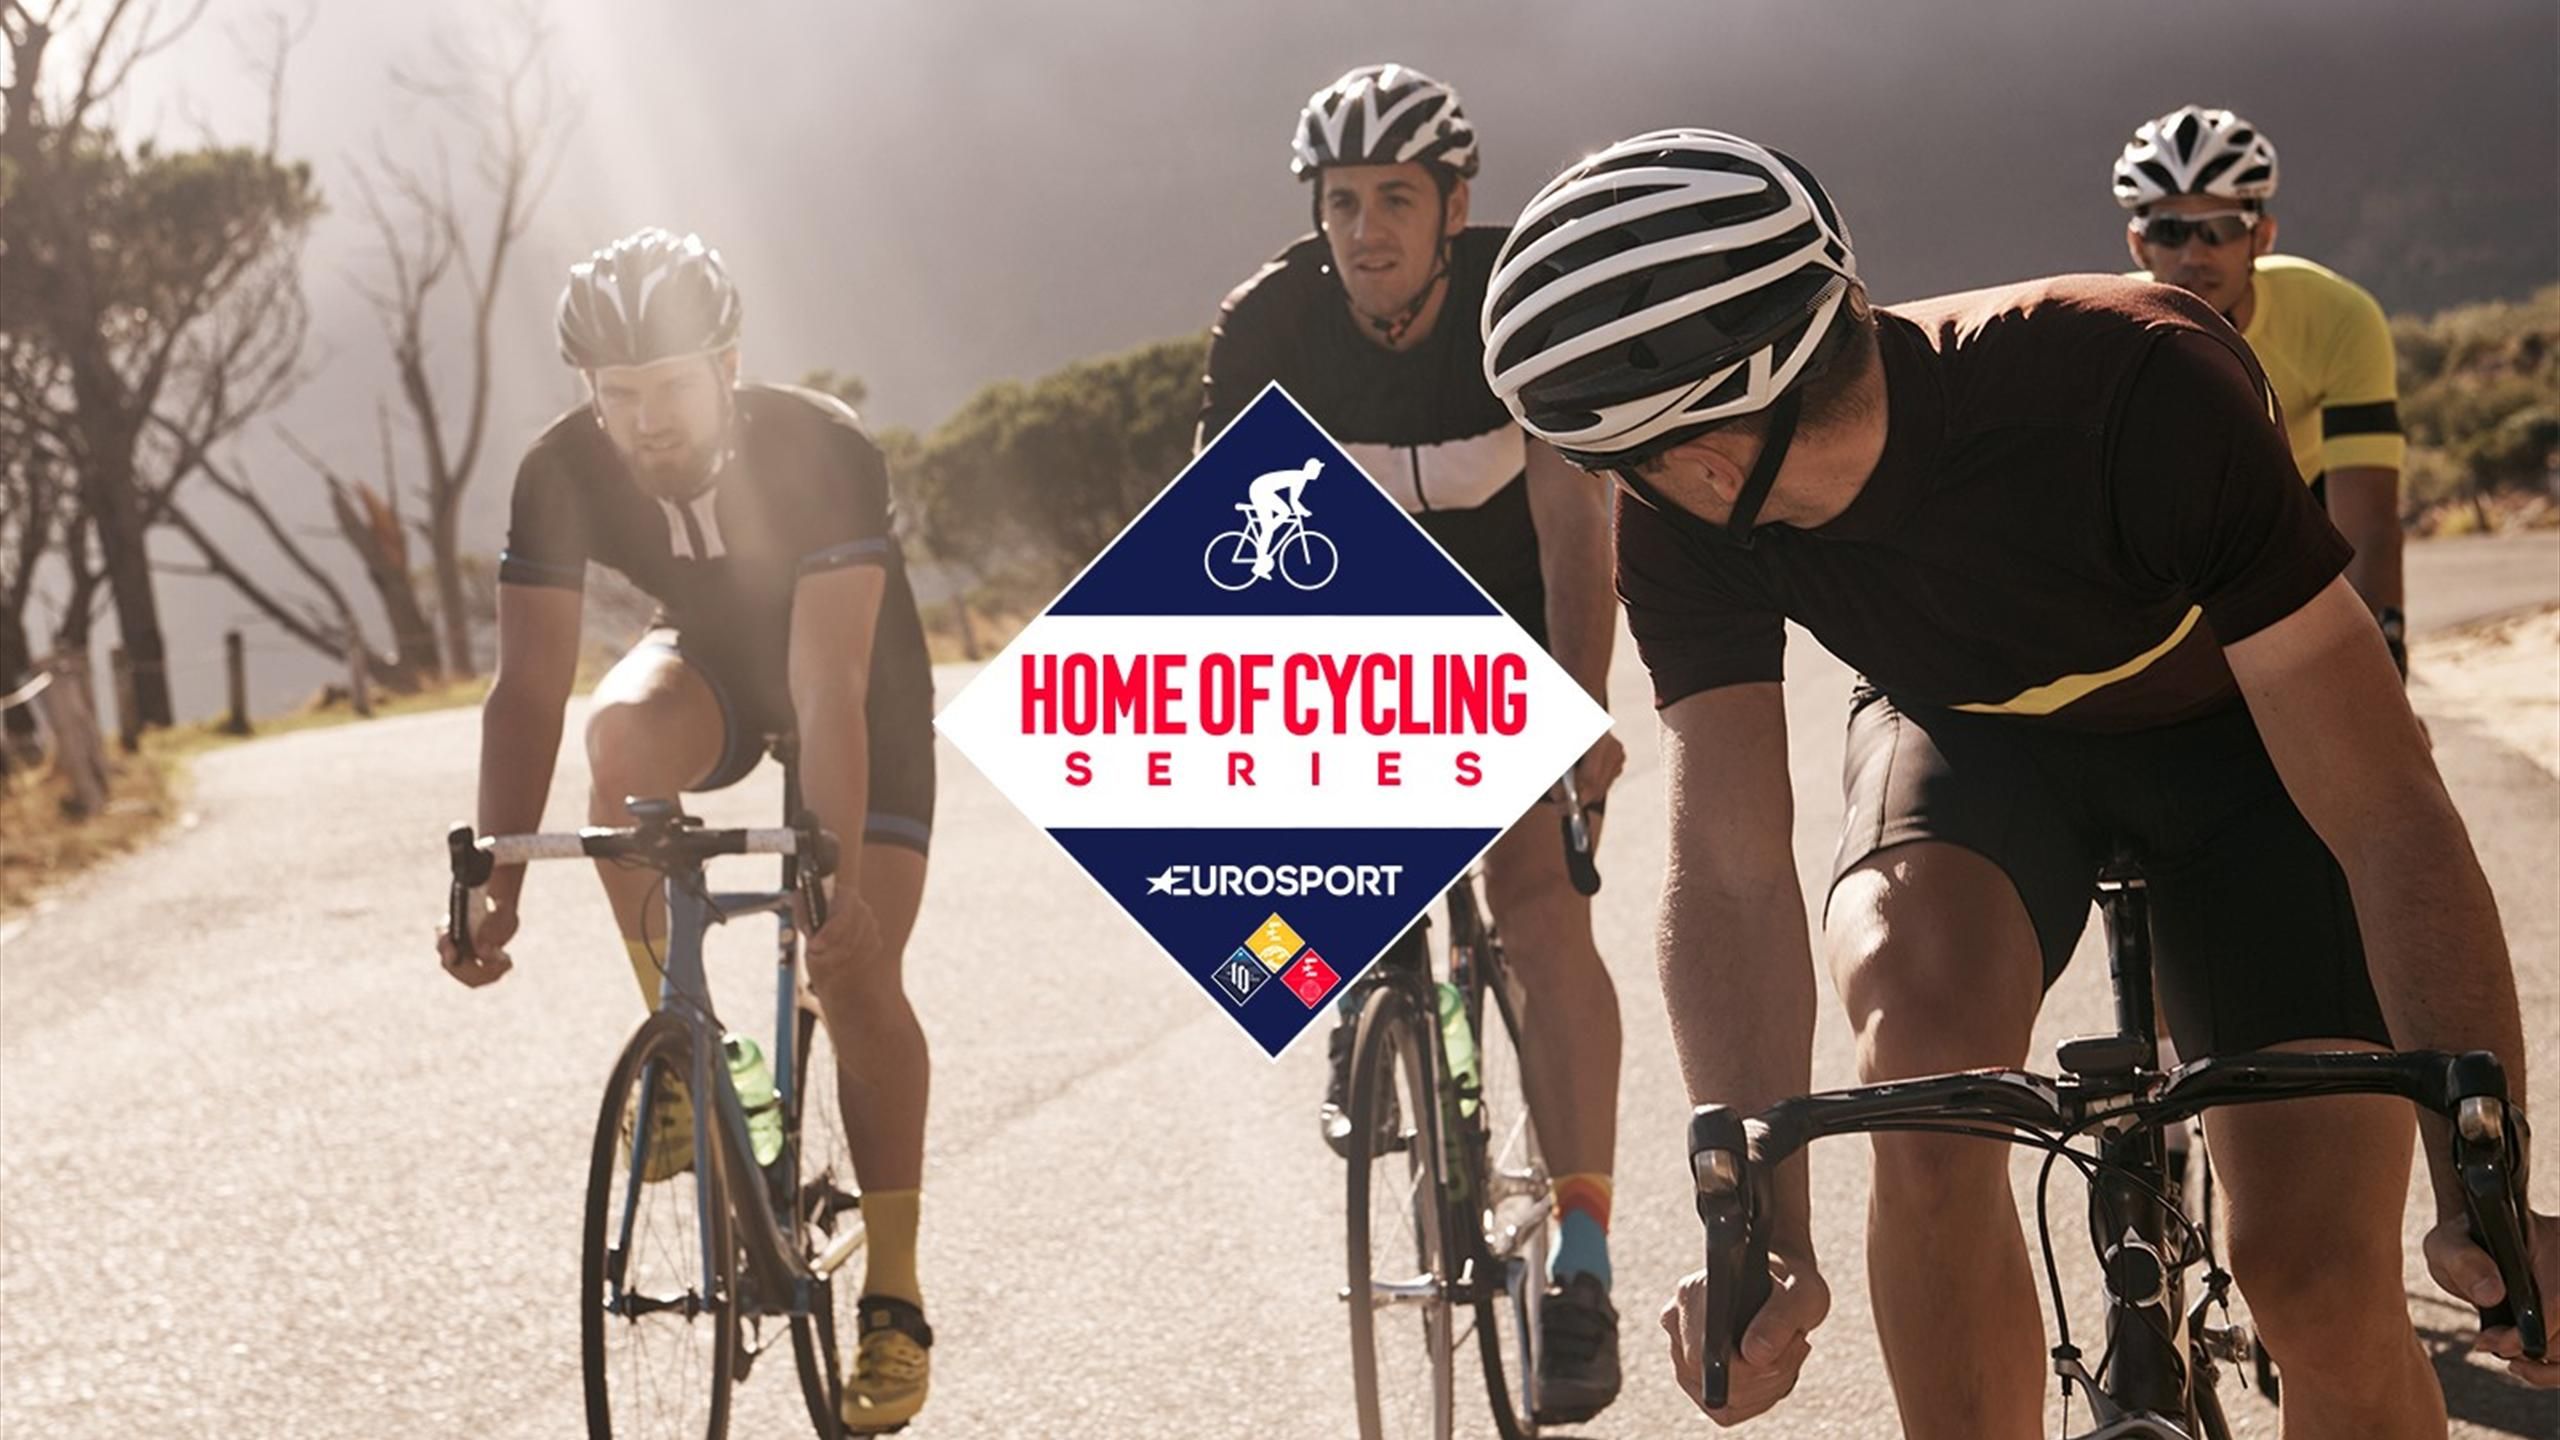 Cycling fans across Europe get chance to ride with Pros with new Eurosport Home of Cycling Series